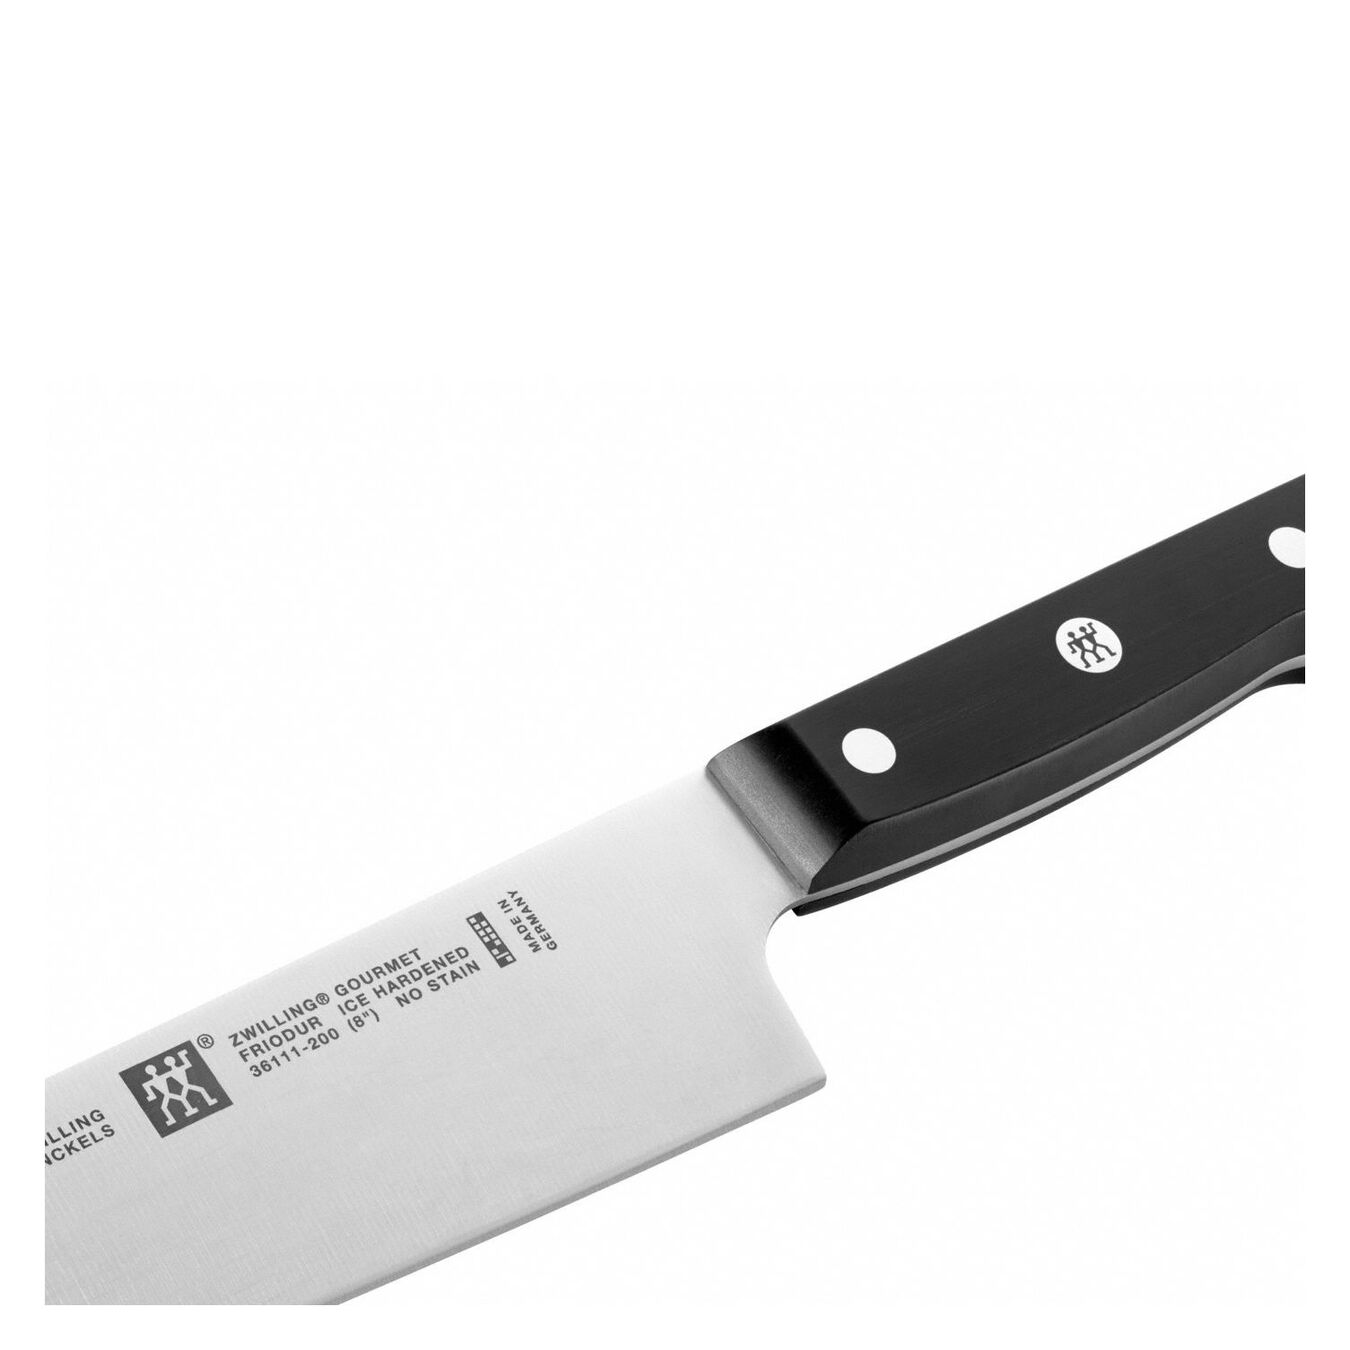 4-inch, Paring knife - Visual Imperfections,,large 2